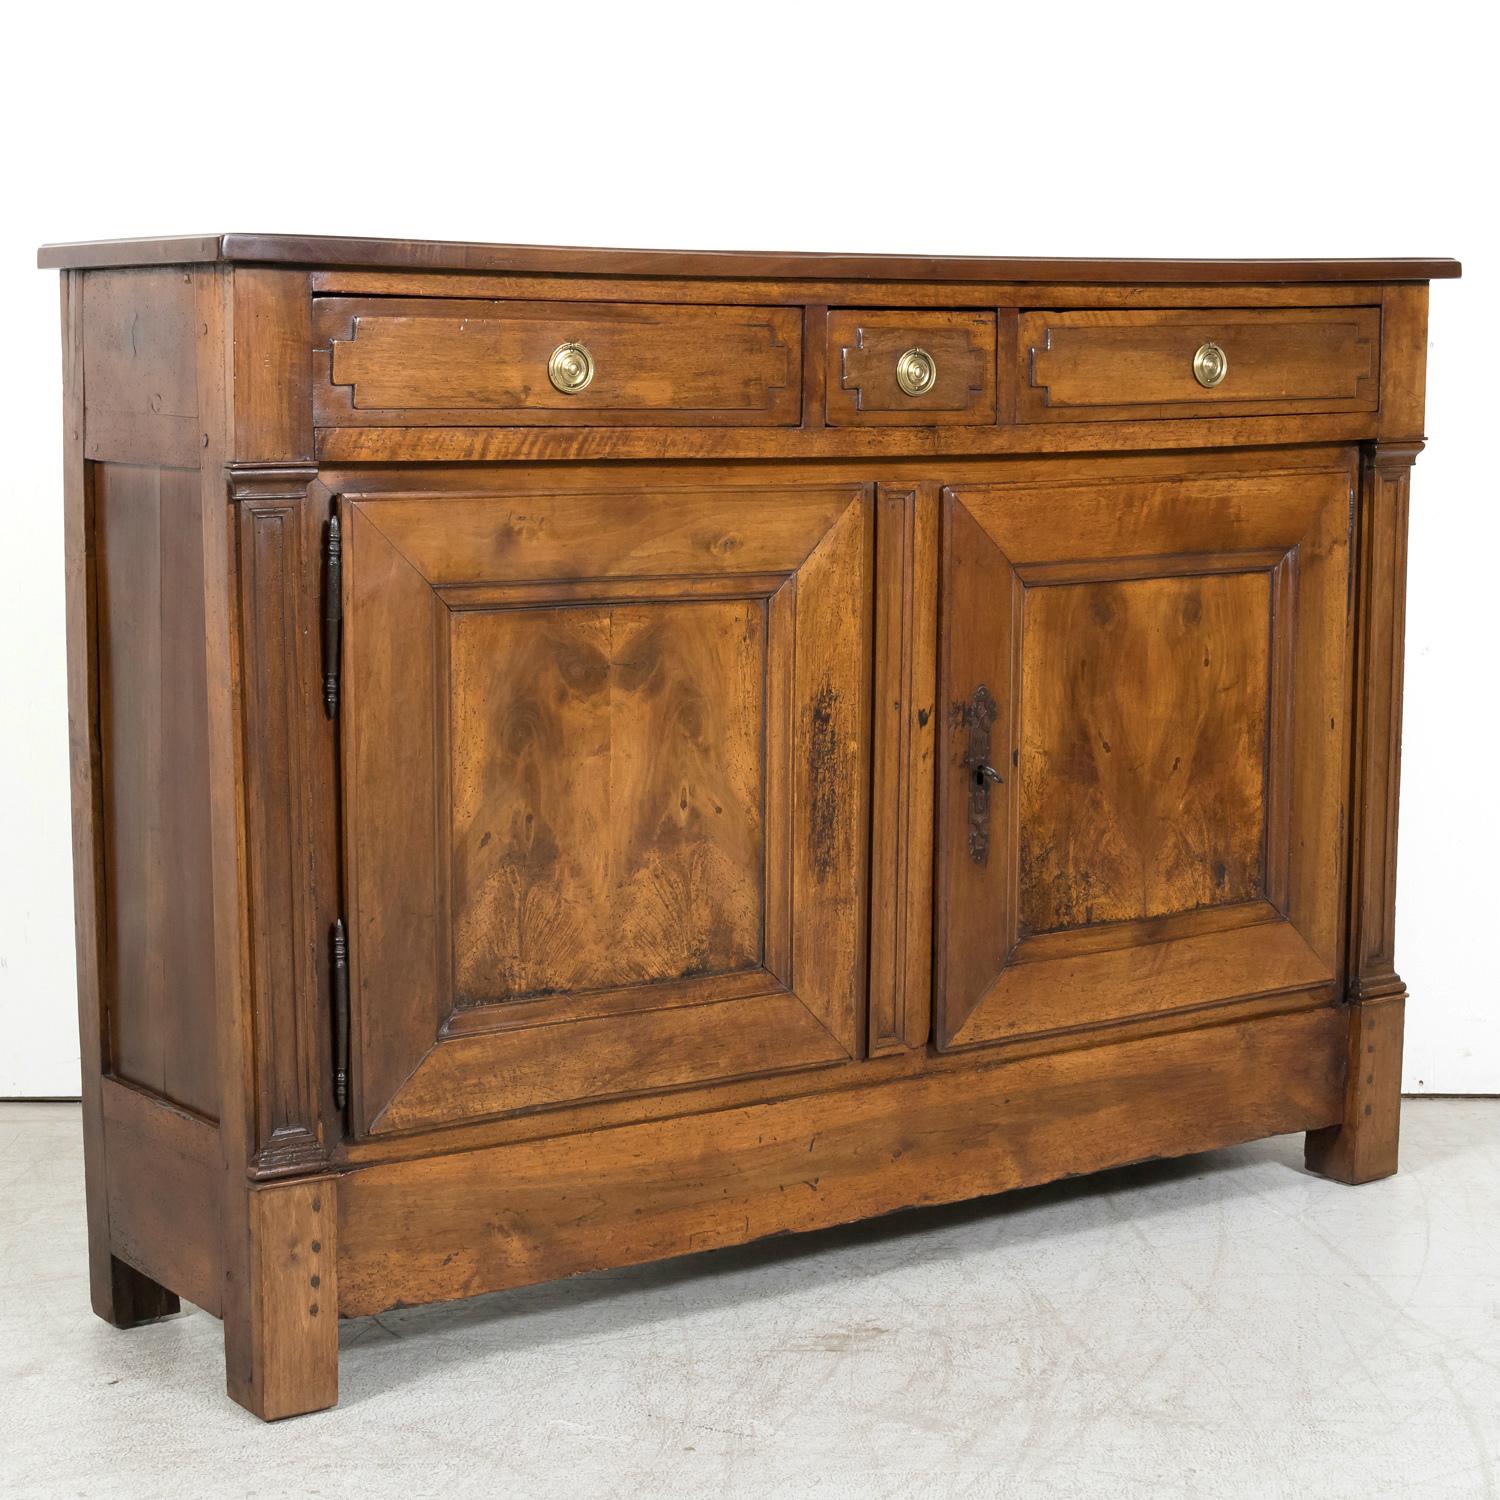 An 18th Century French Directoire period buffet handcrafted from solid walnut by talented artisans near Lyon, circa 1790s. Having a rectangular plank top that provides a great surface for serving and display above three carved drawers with brass